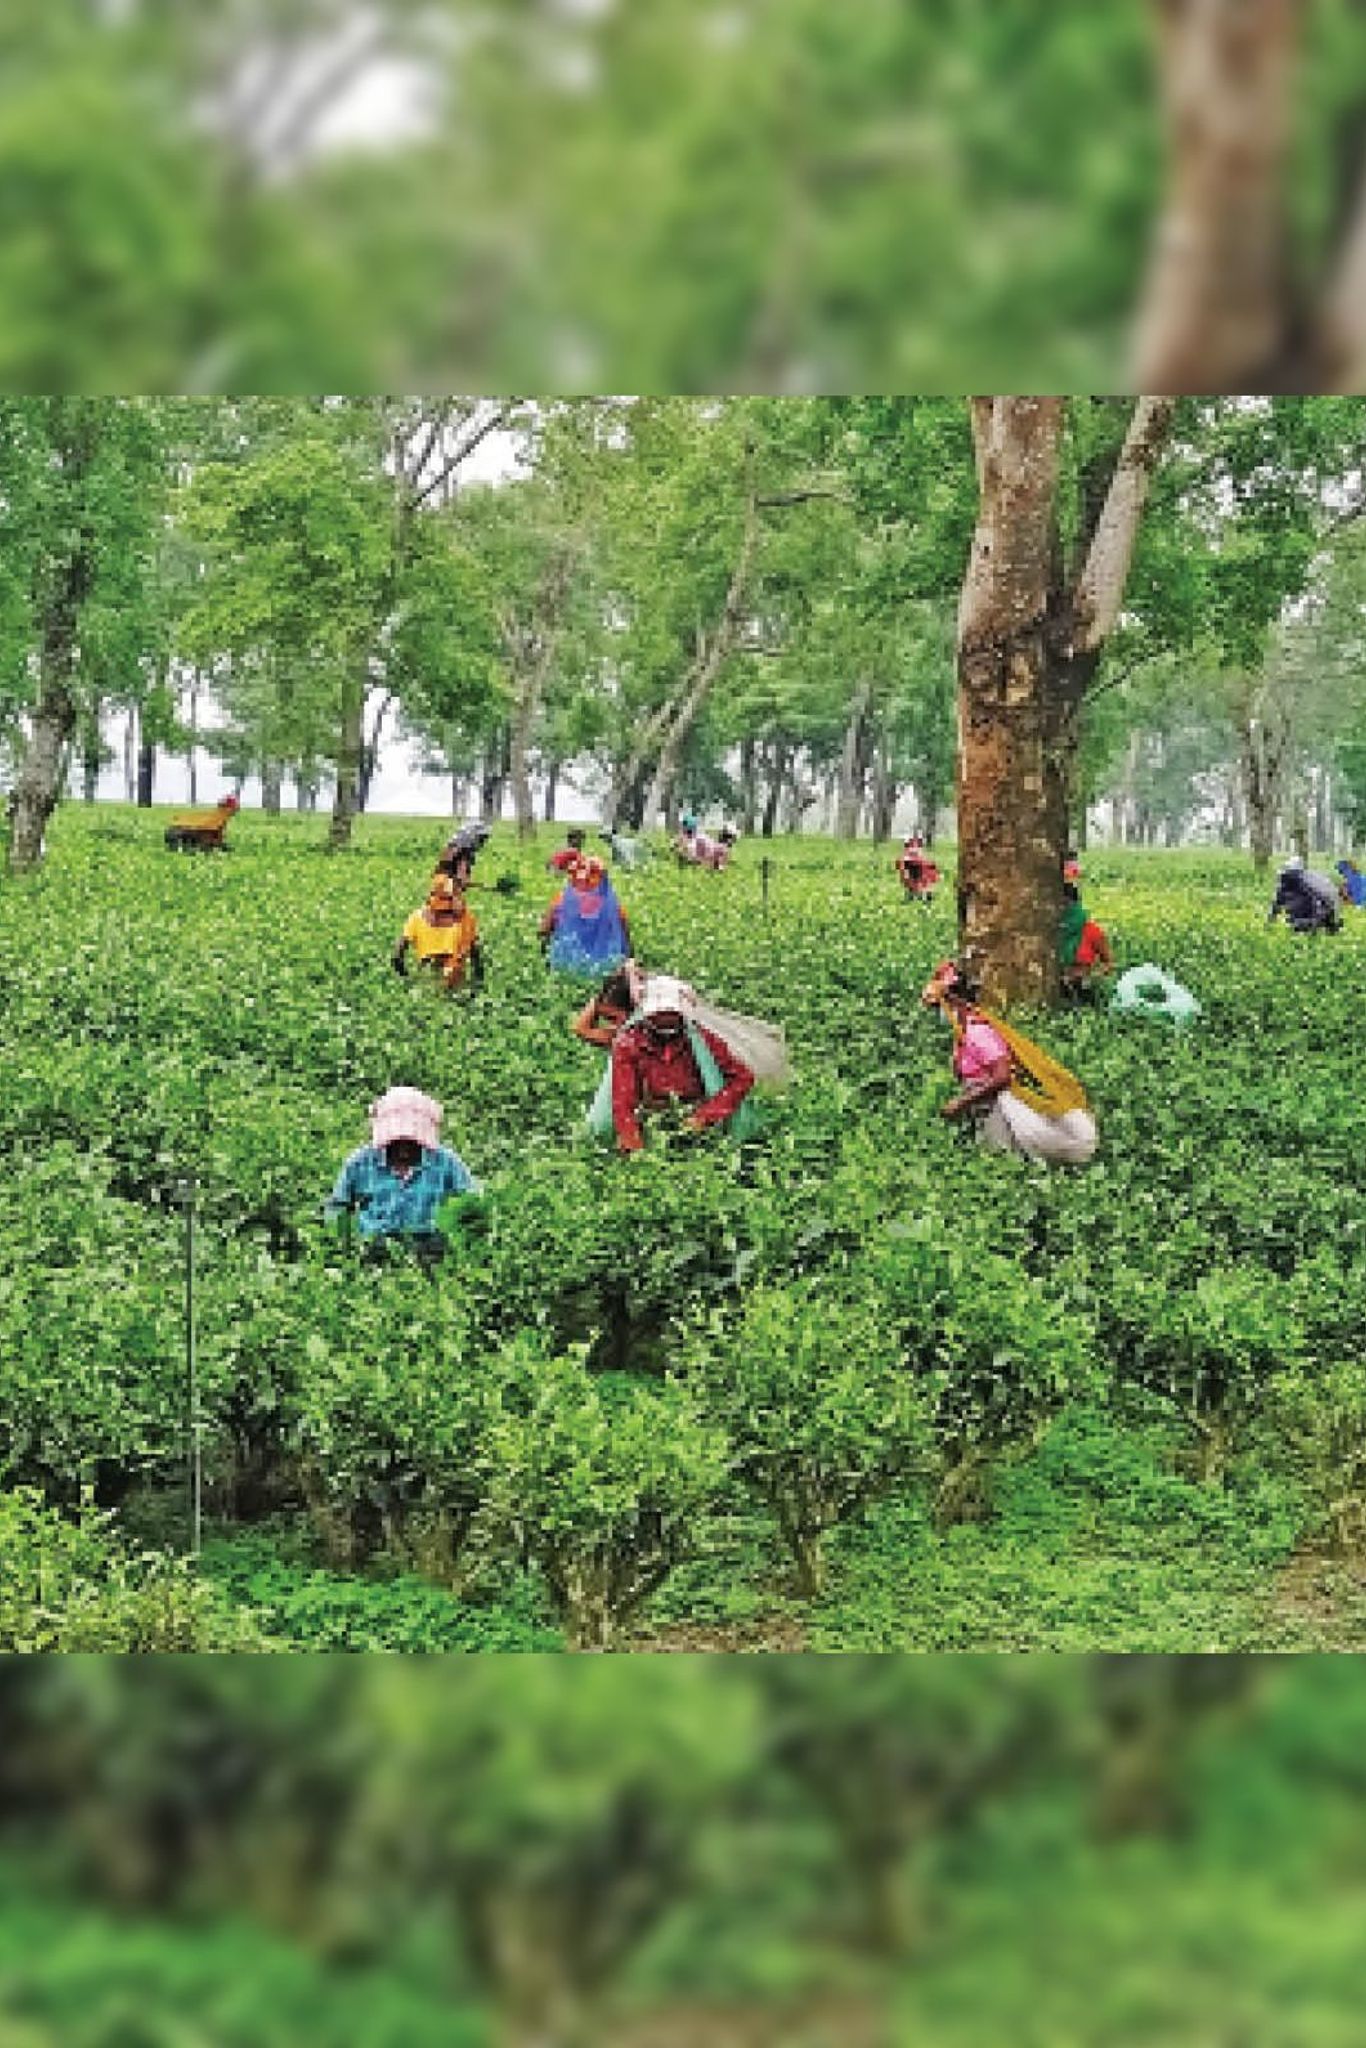 Nine private and one government tea-processing plant in Kishanganj